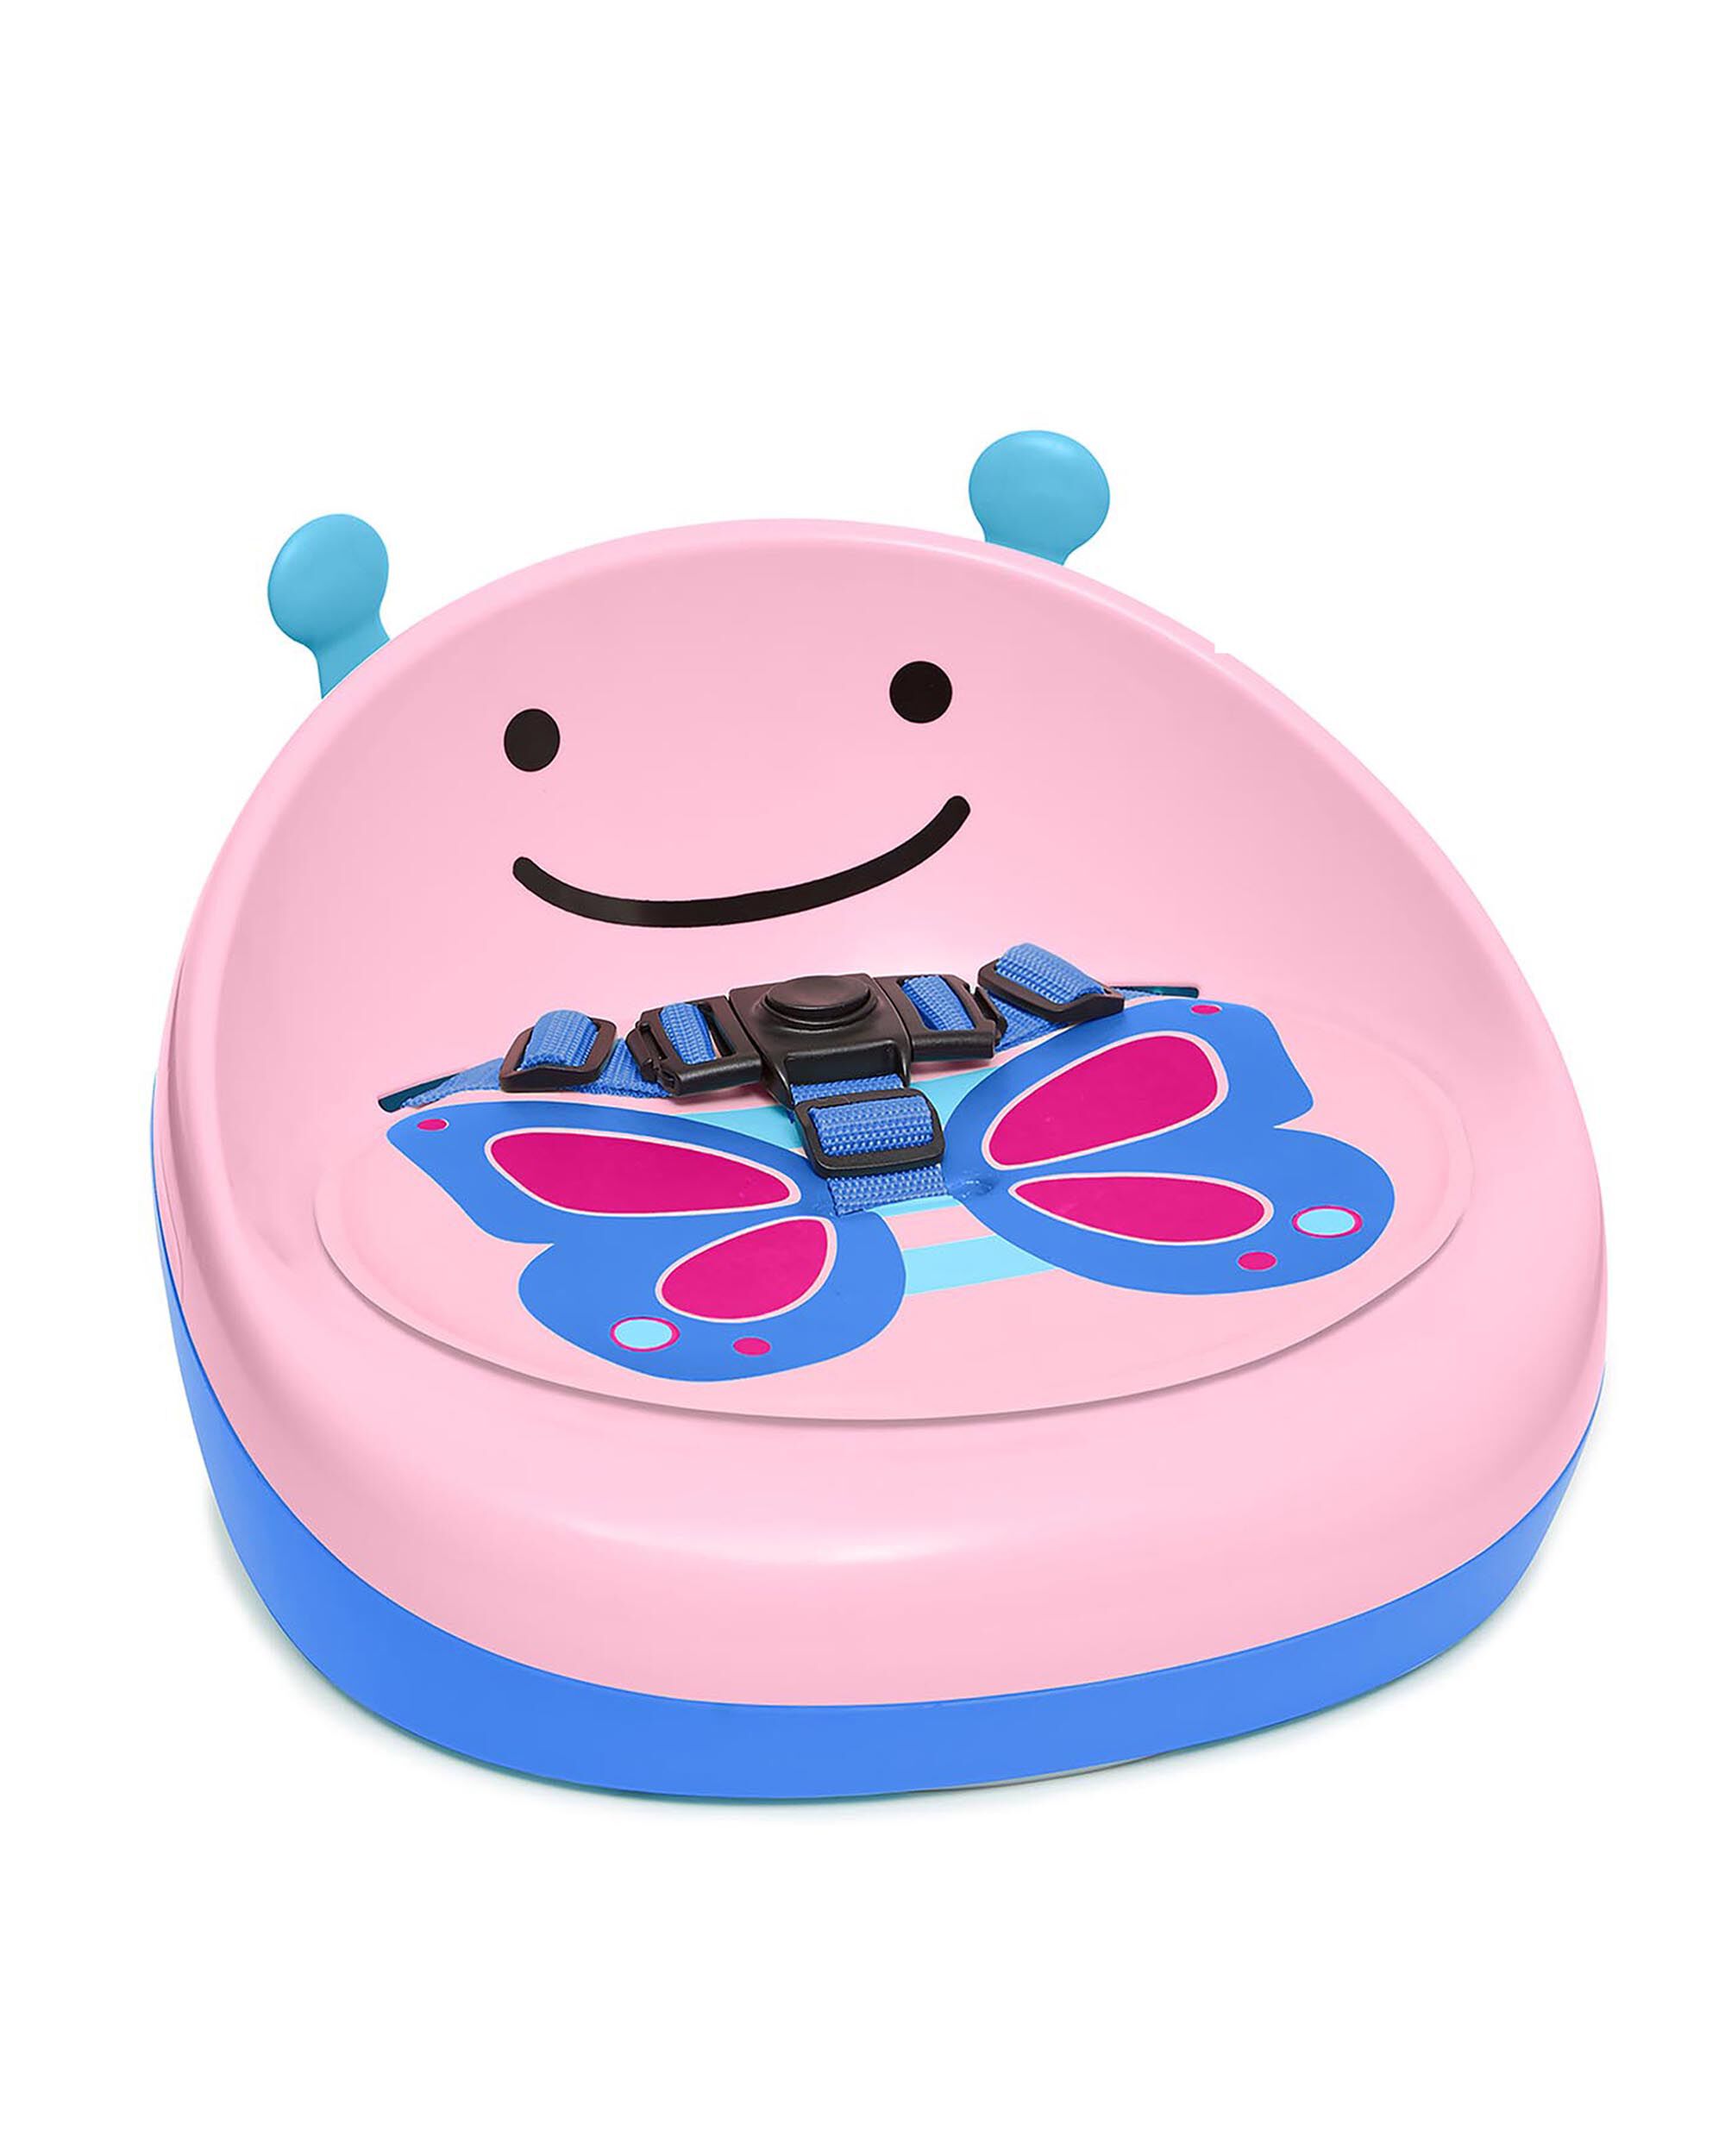 Skip Hop Zoo Booster Seat Pink Butterfly 